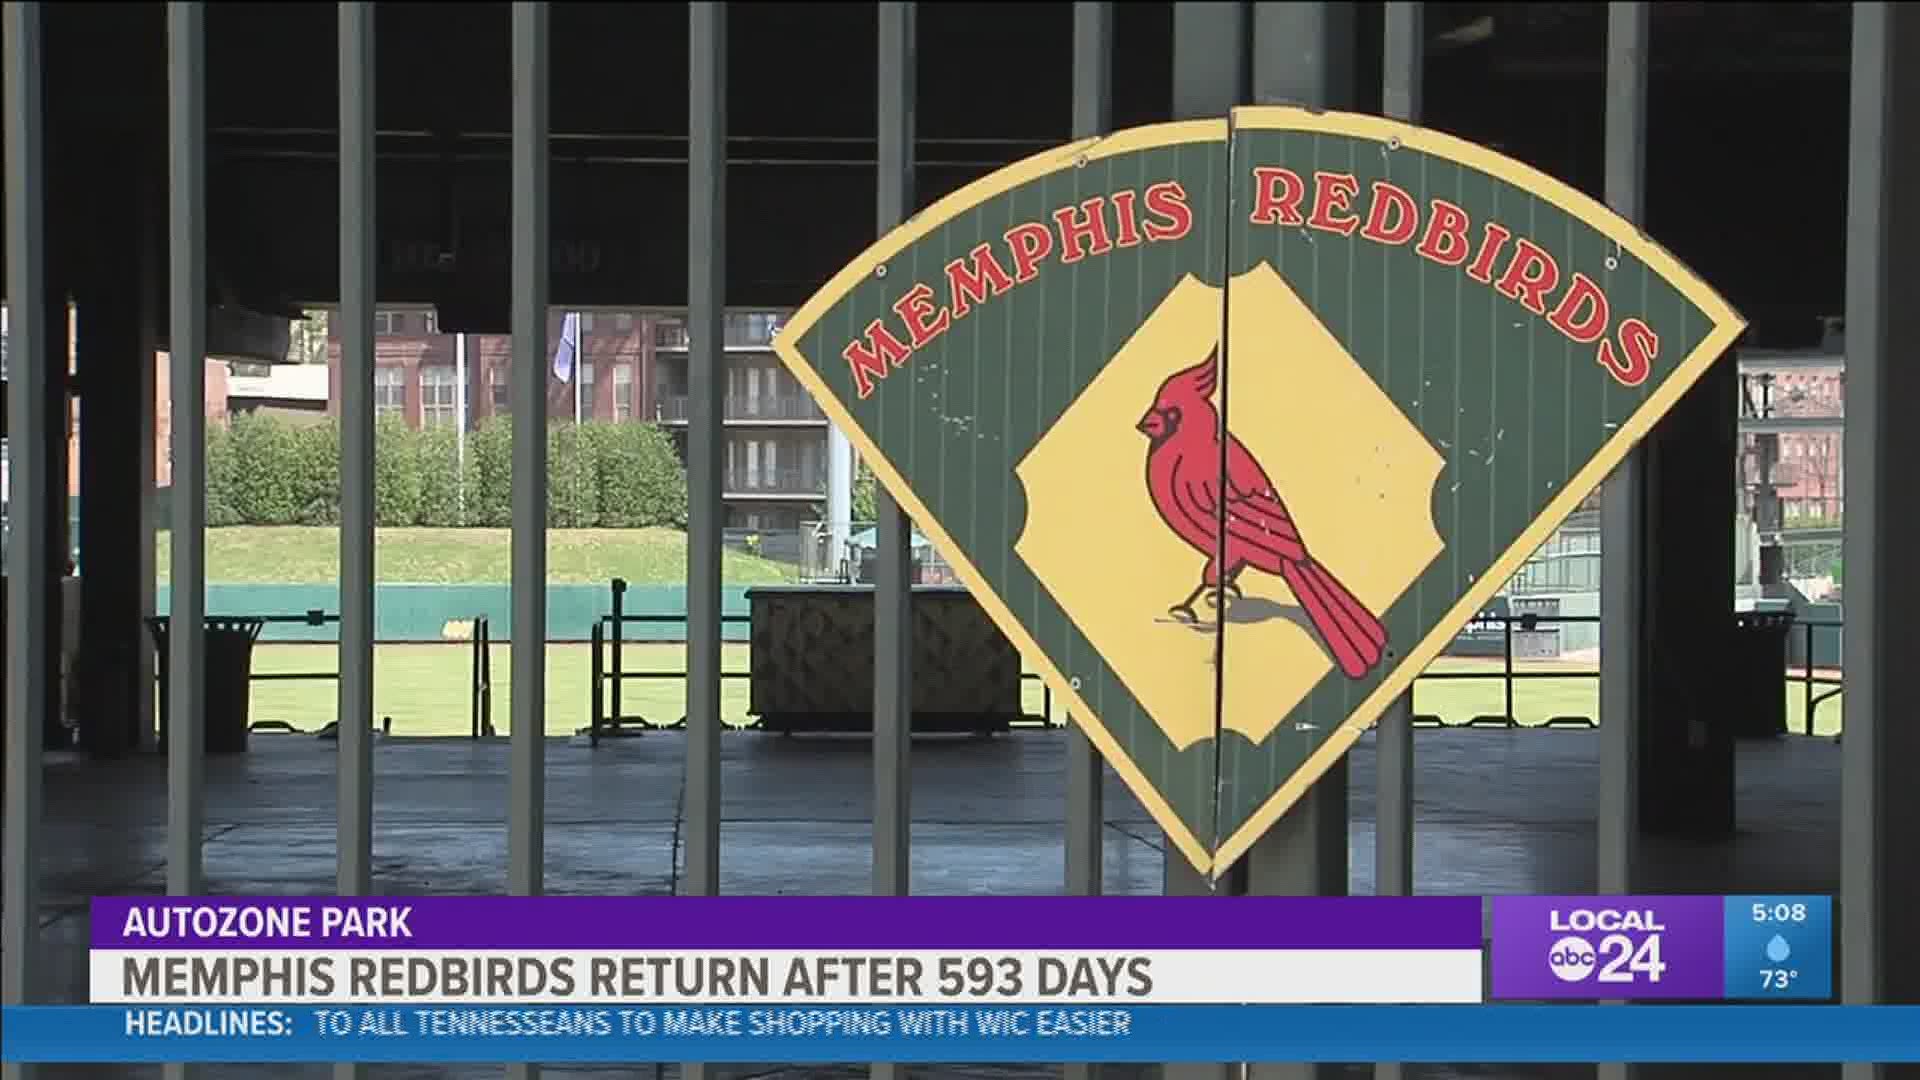 Tuesday is Opening Night for the Memphis Redbirds after the cancellation of the 2020 season.